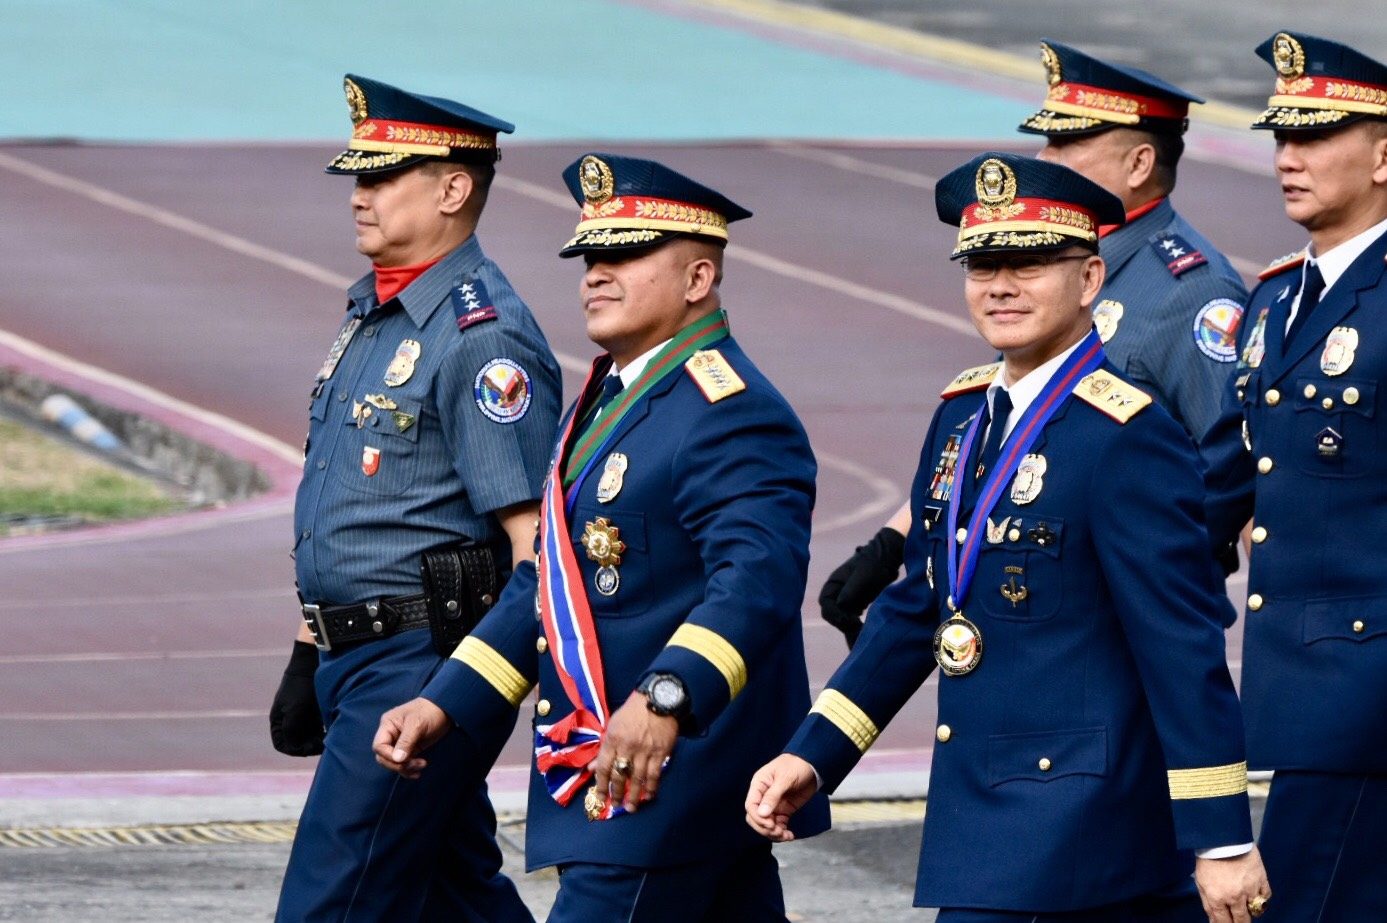 CLASSMATES. Albayalde marches with batch mates from the Philippine Military Academy Sinagtala Class of 1986 at Camp Crame. File photo by Angie de Silva/Rappler 